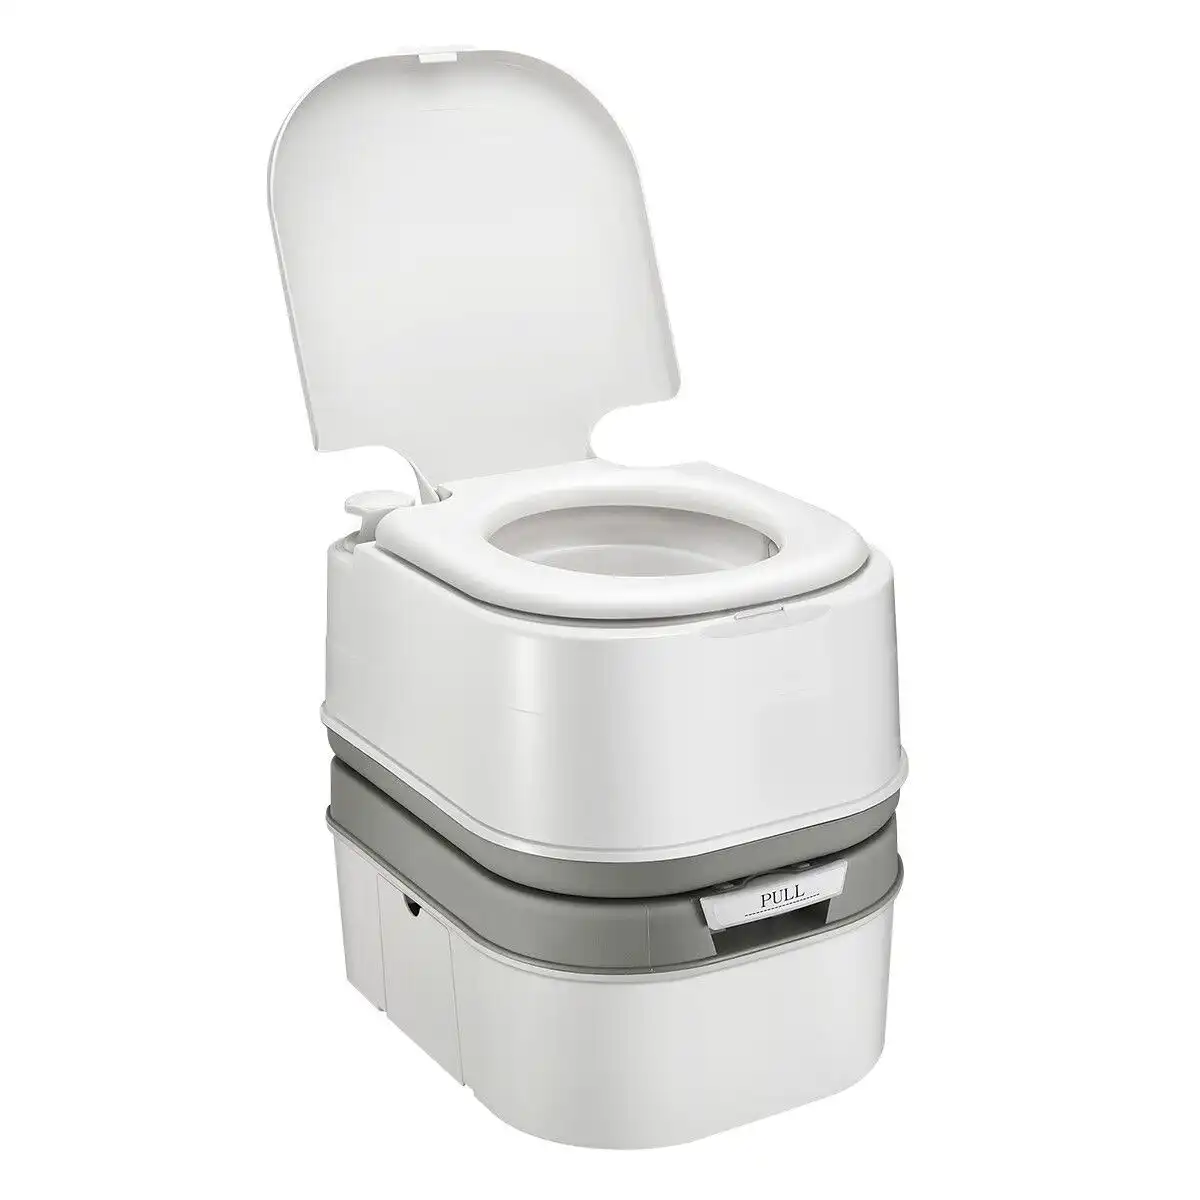 Ausway 24L Portable Toilet Camping Travel Mobile Porta Potty White and Grey 44.5x35x44cm